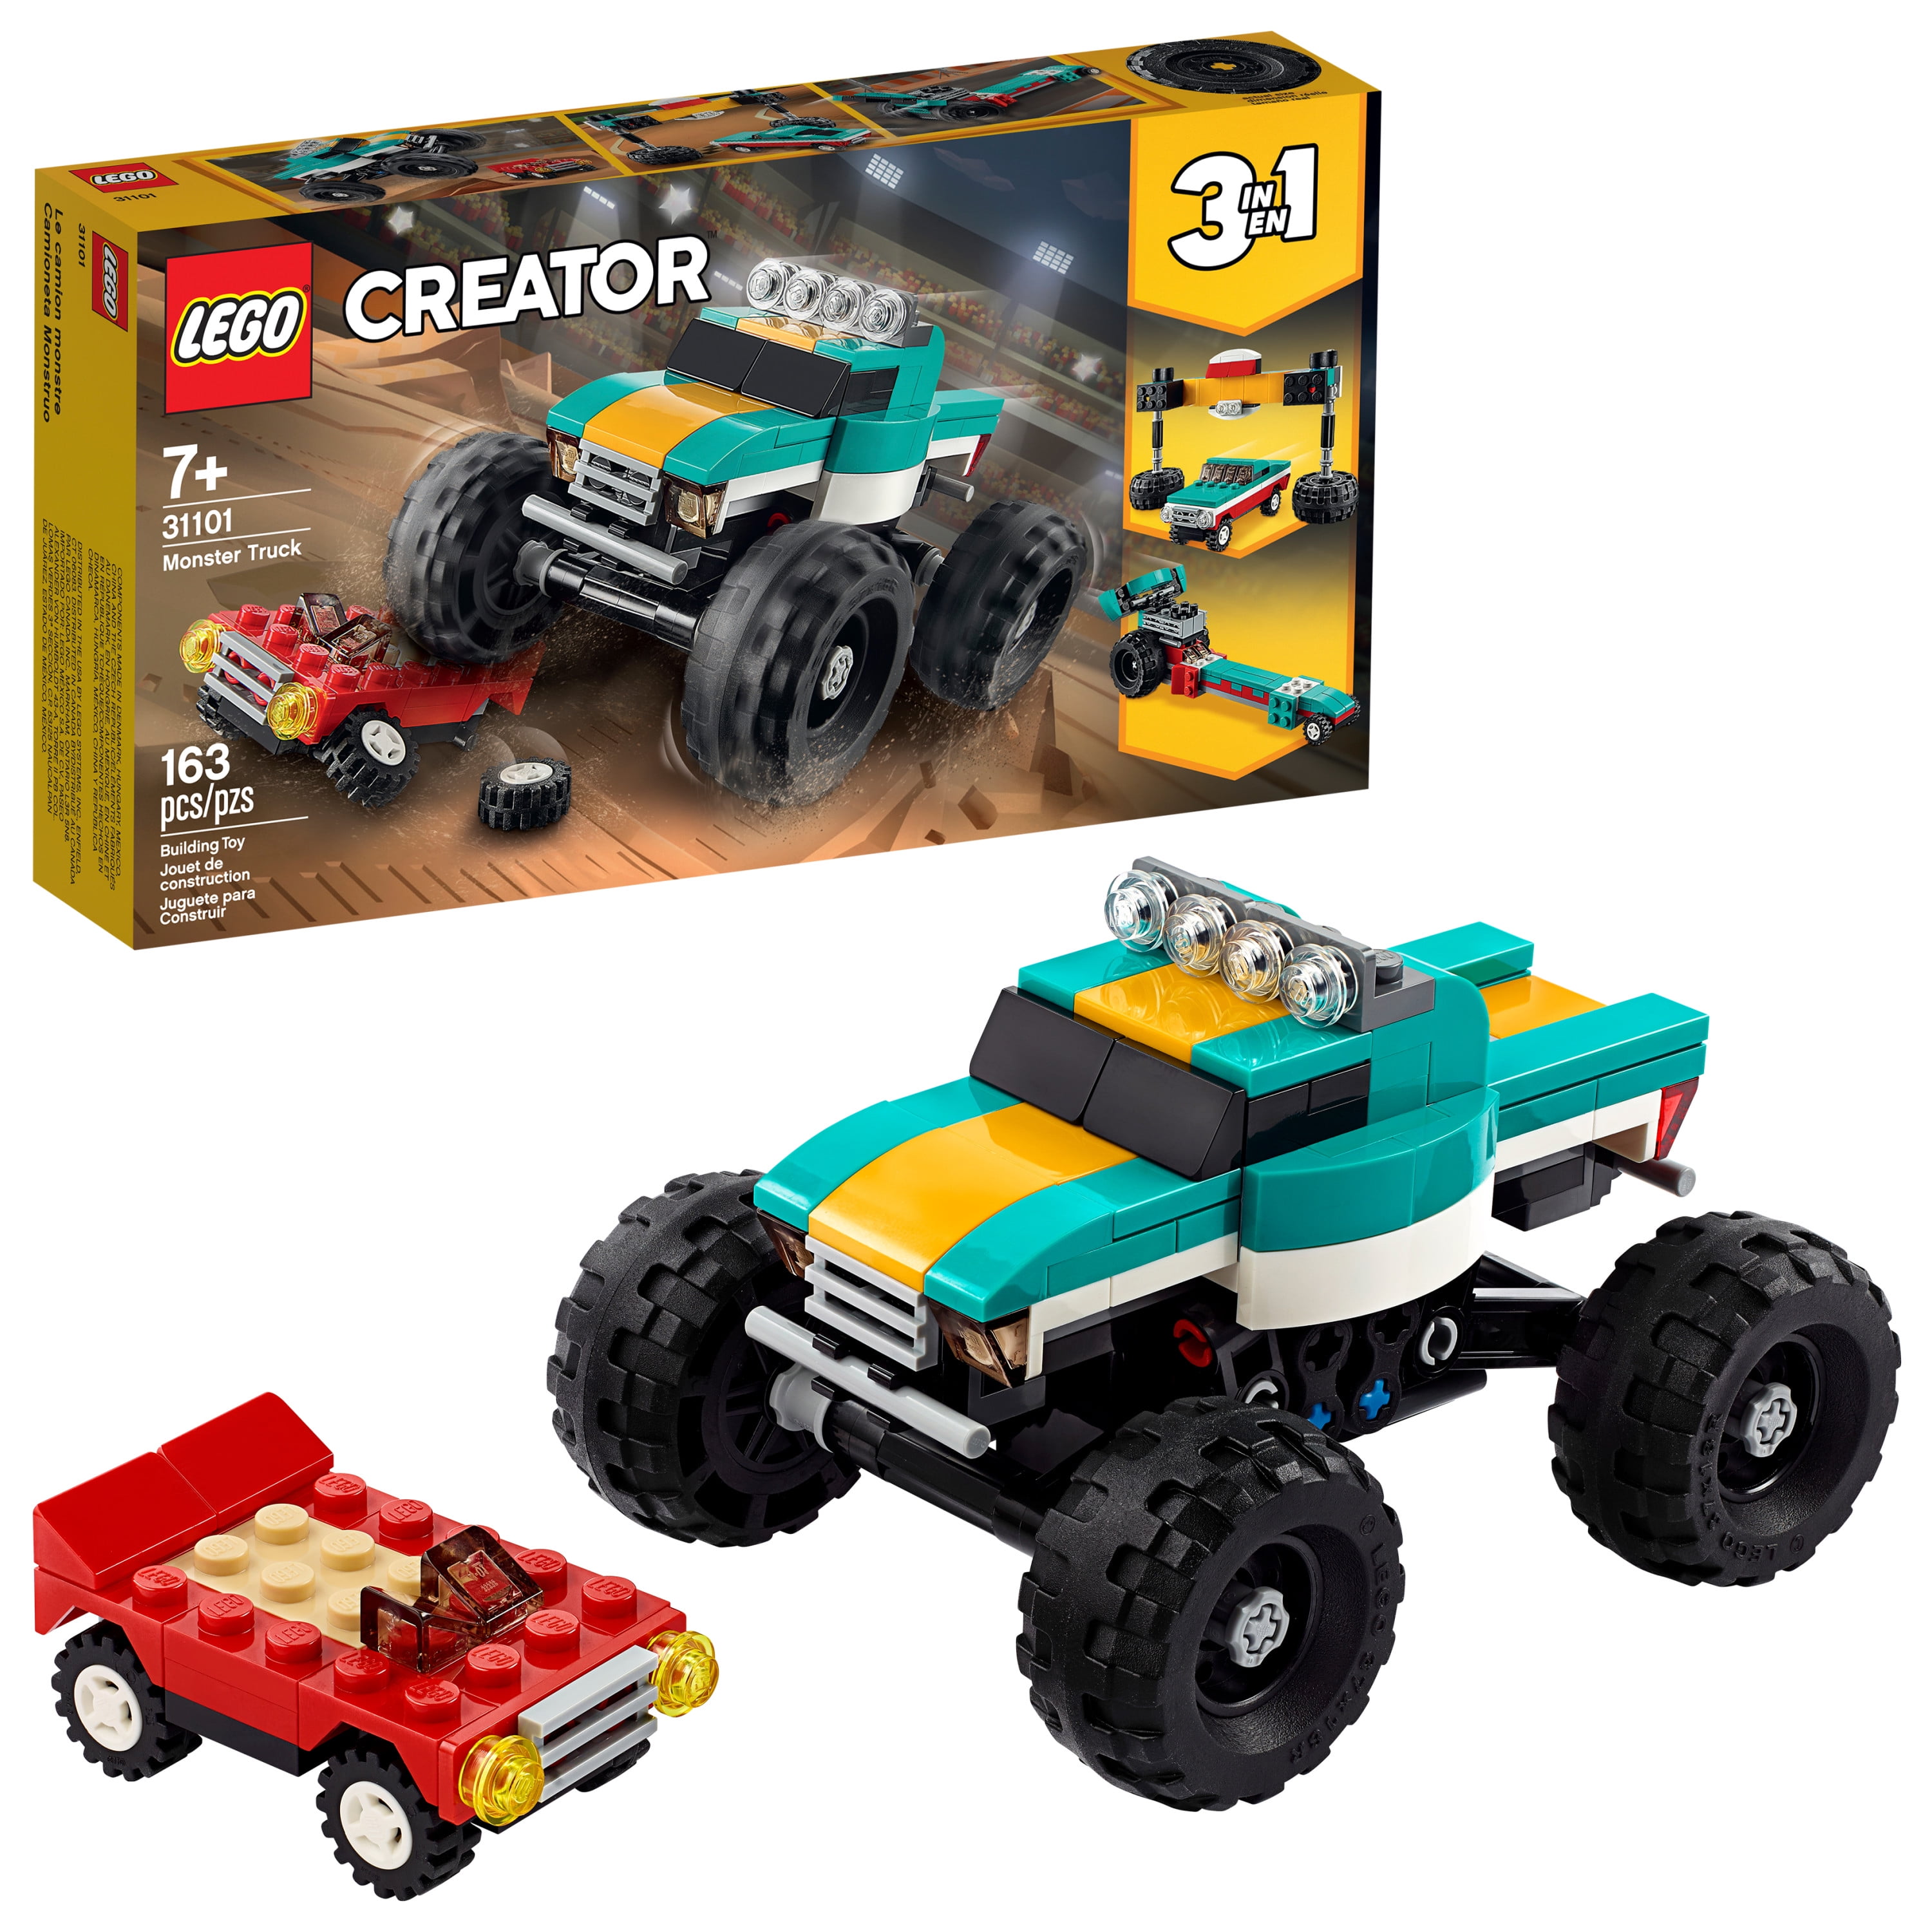 LEGO Creator 3in1 Monster Truck Toy 31101 Cool | Ubuy Thailand